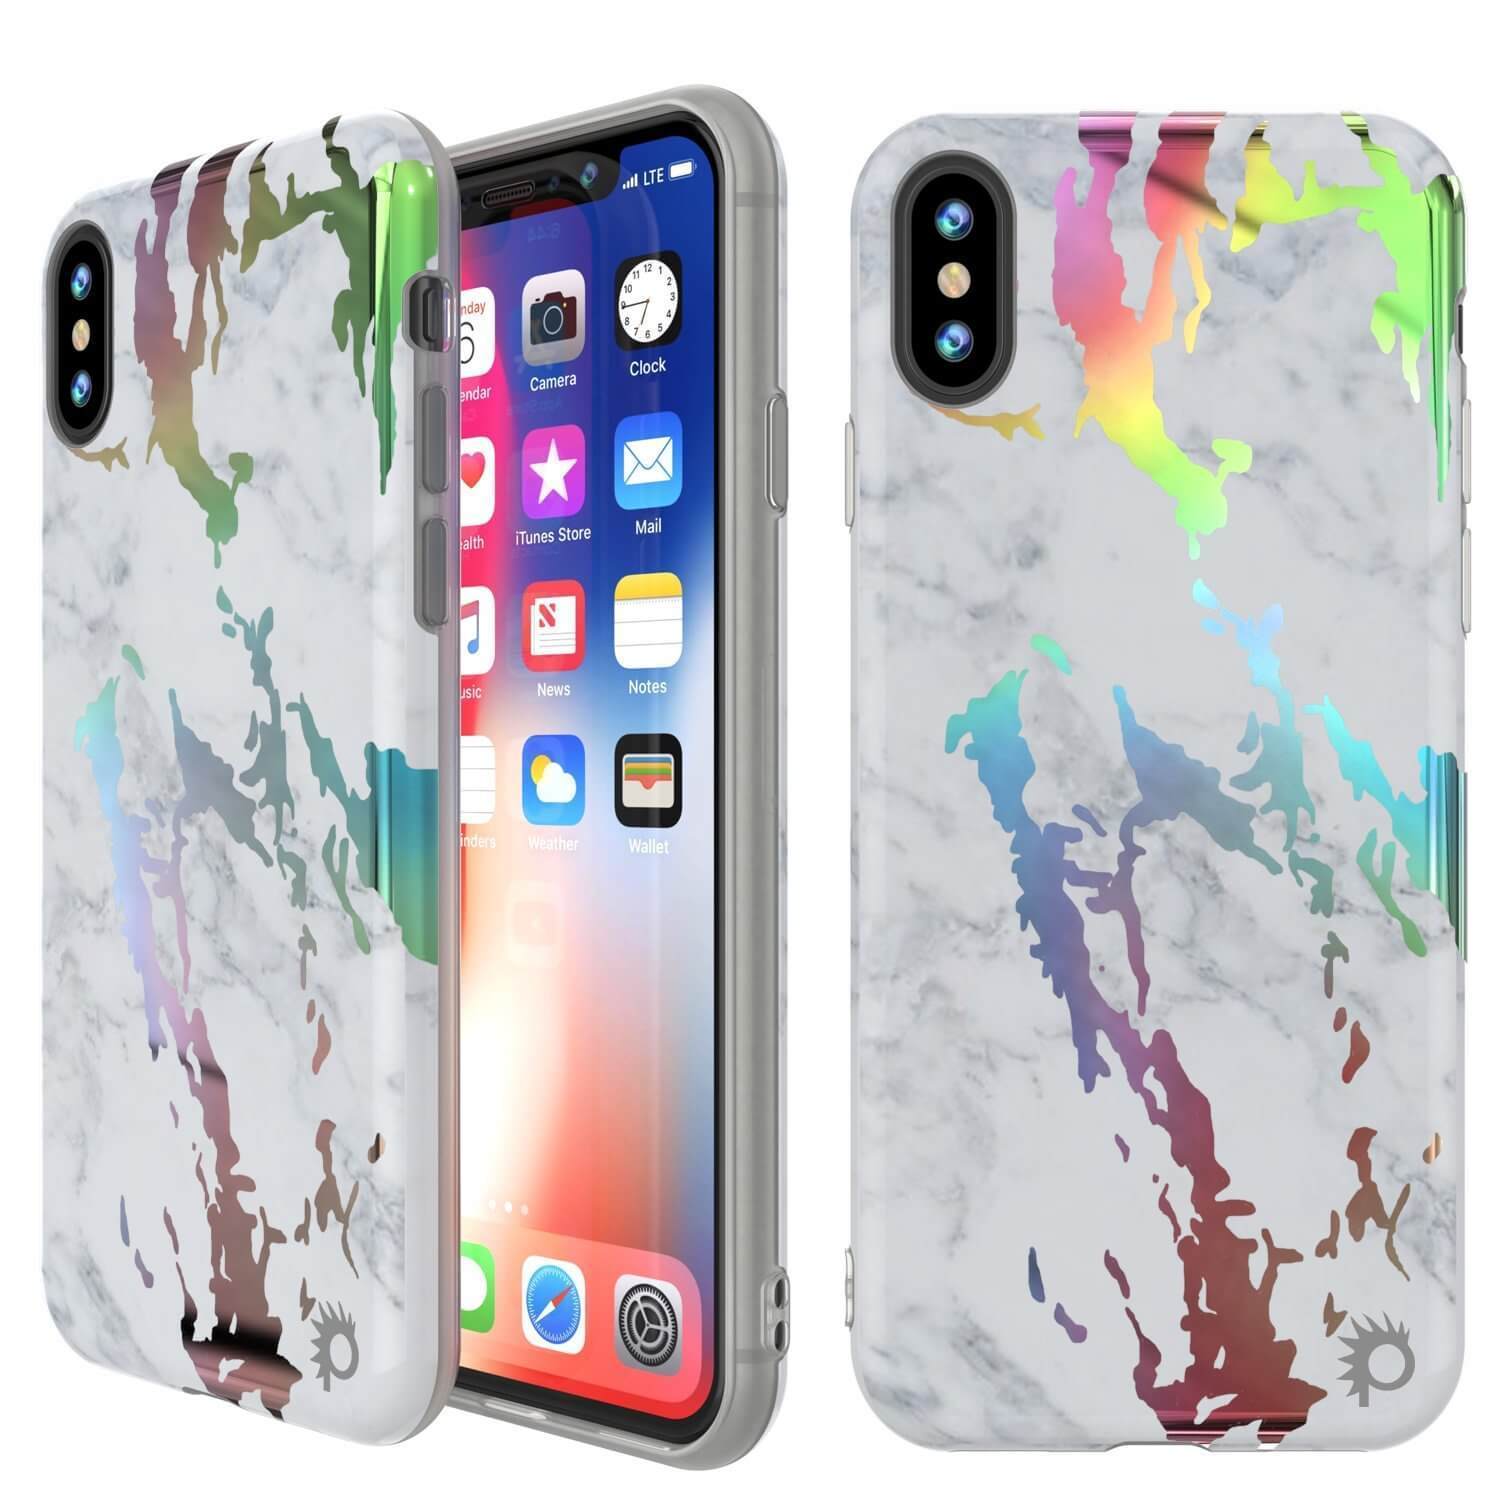 Punkcase iPhone XS Max Marble Case, Protective Full Body Cover W/9H Tempered Glass Screen Protector (Blanco Marmo)